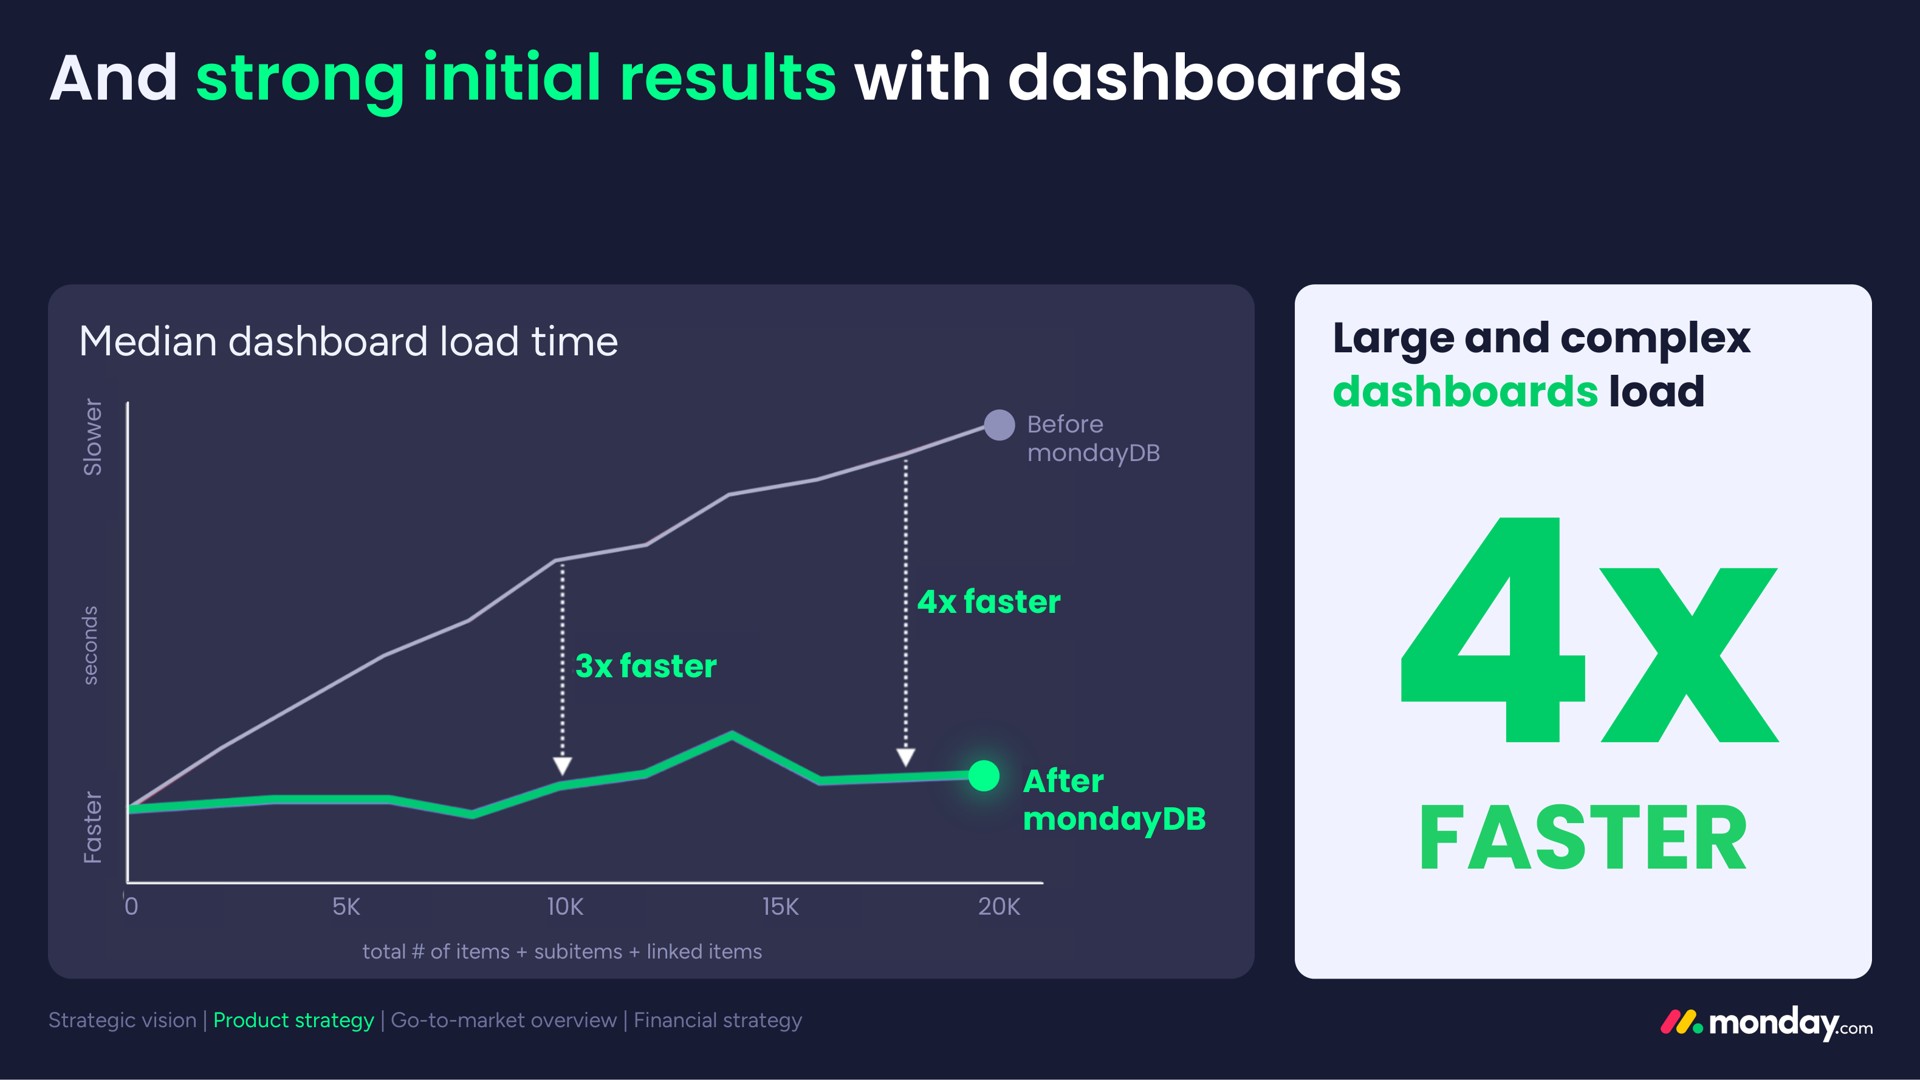 and strong initial results with dashboards faster | monday.com